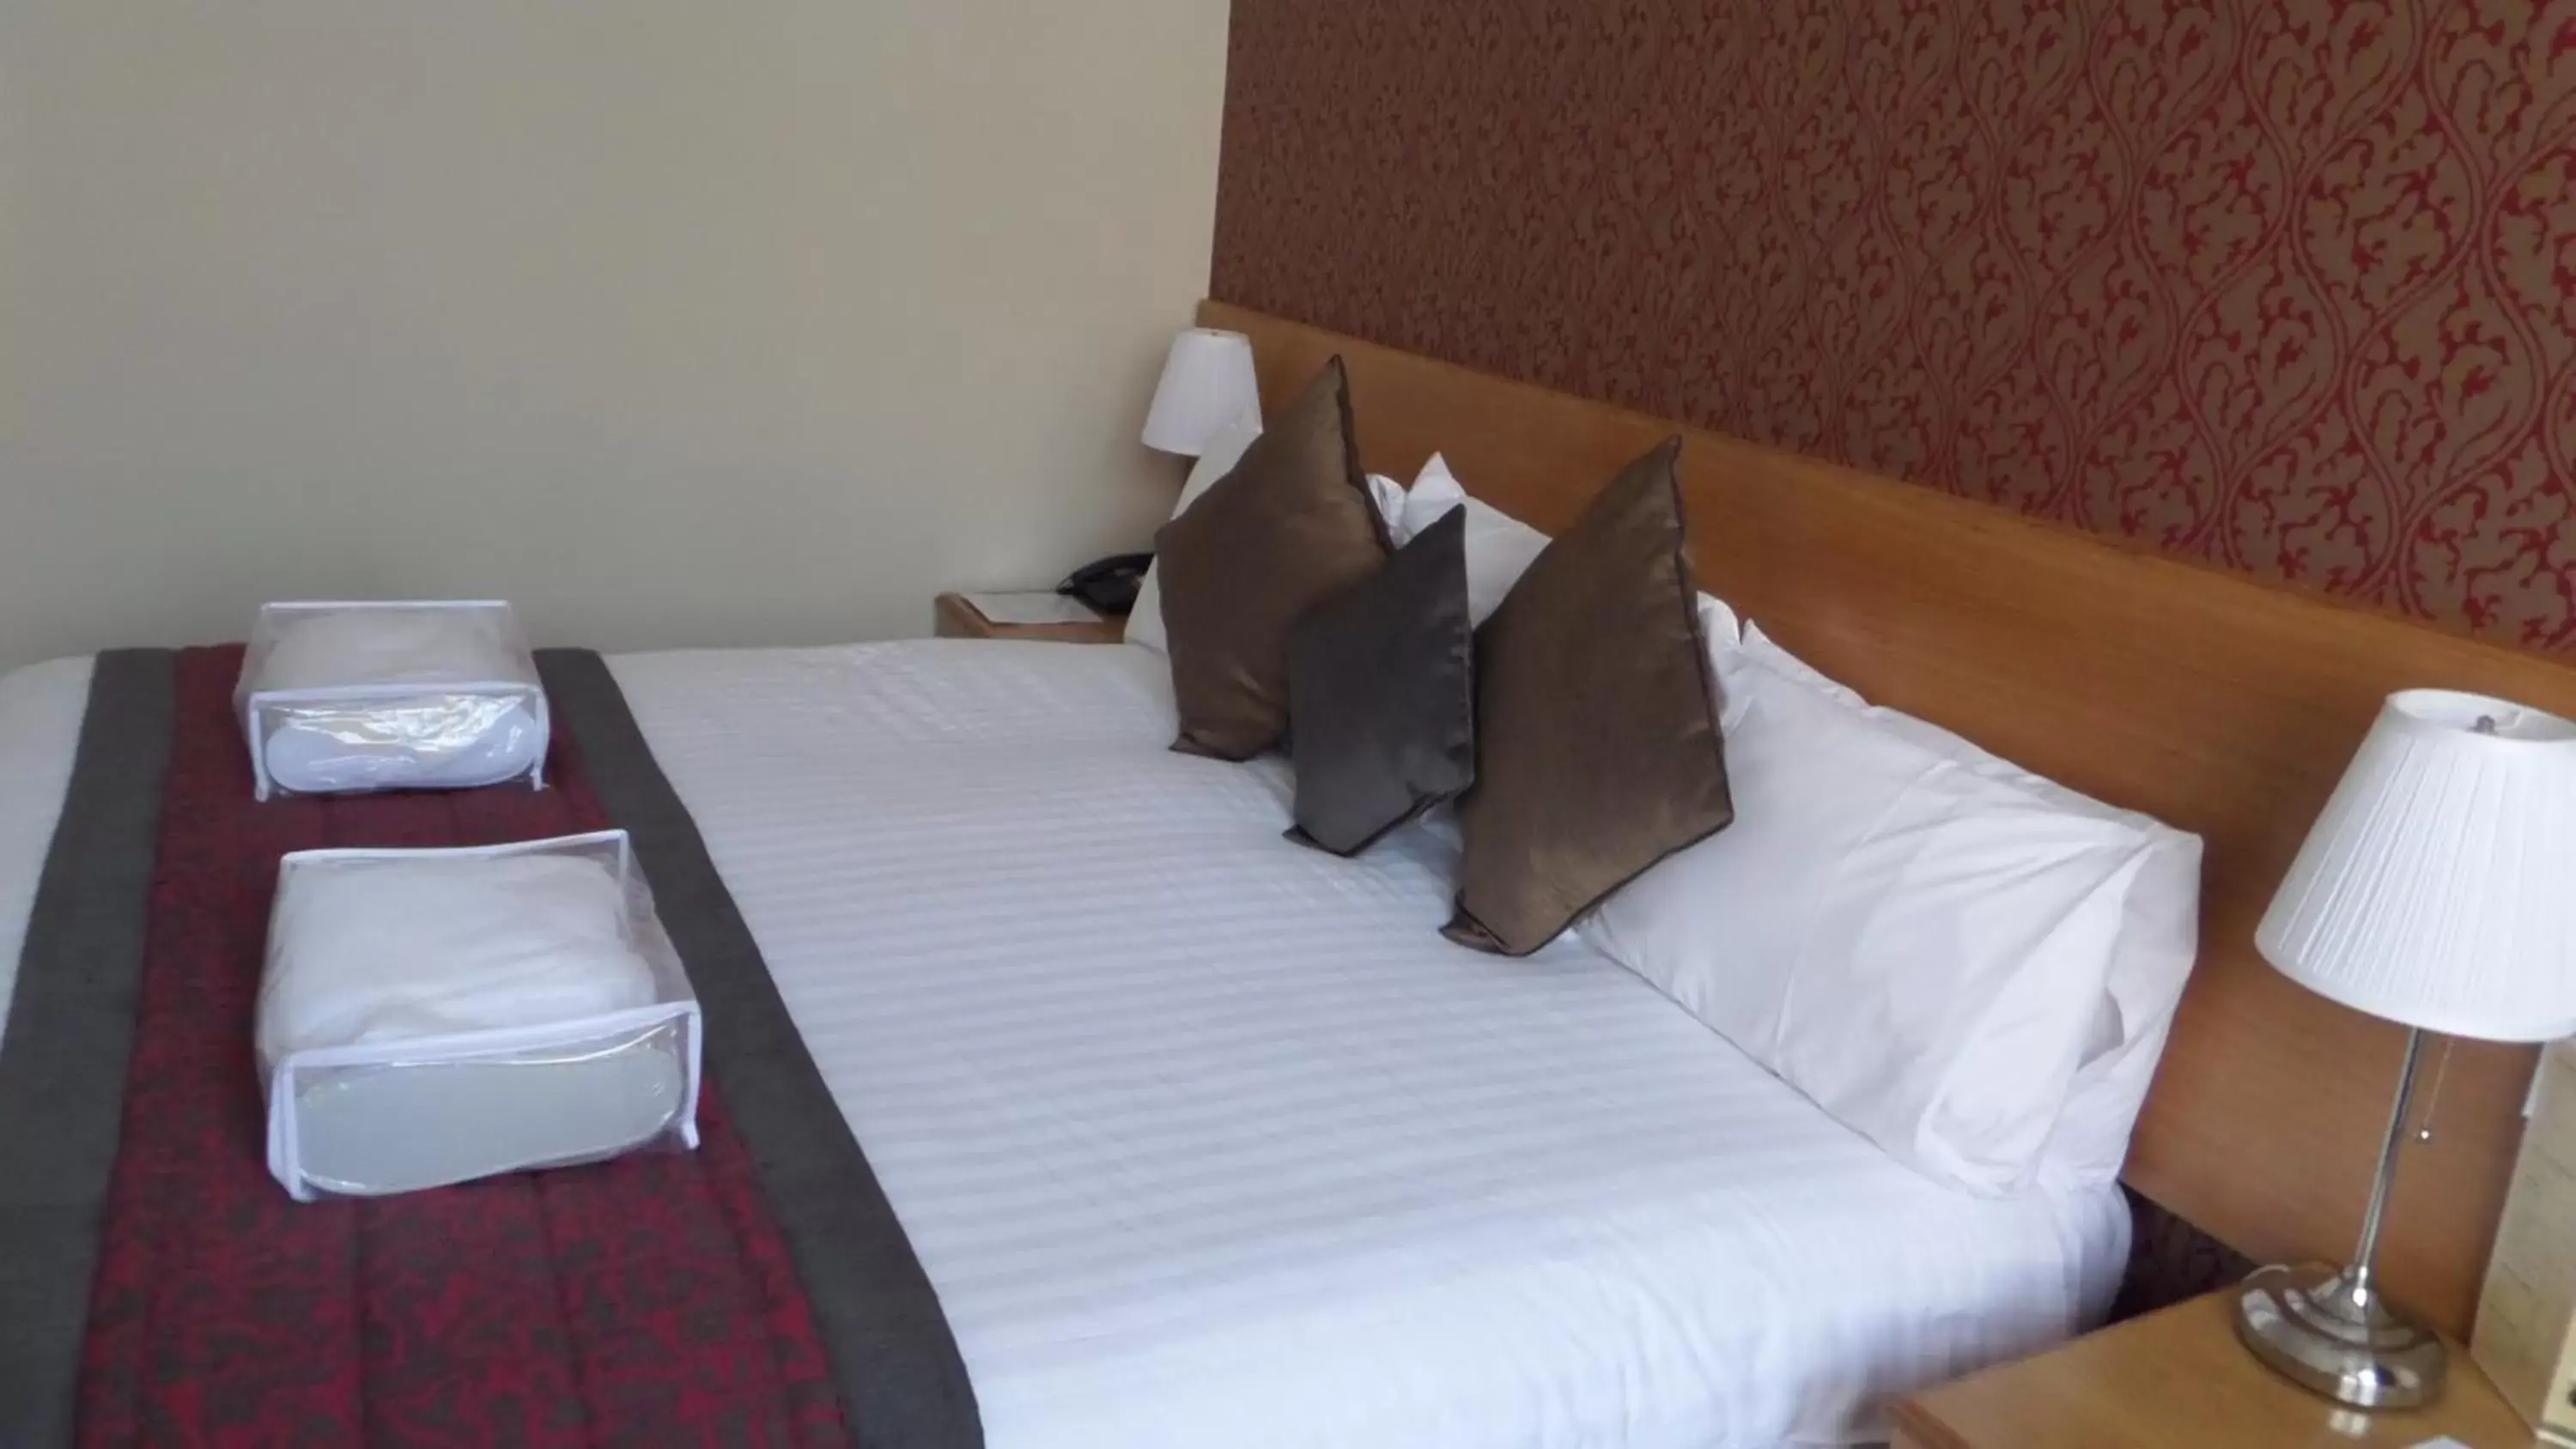 Bed, Room Photo in Crown & Mitre Hotel